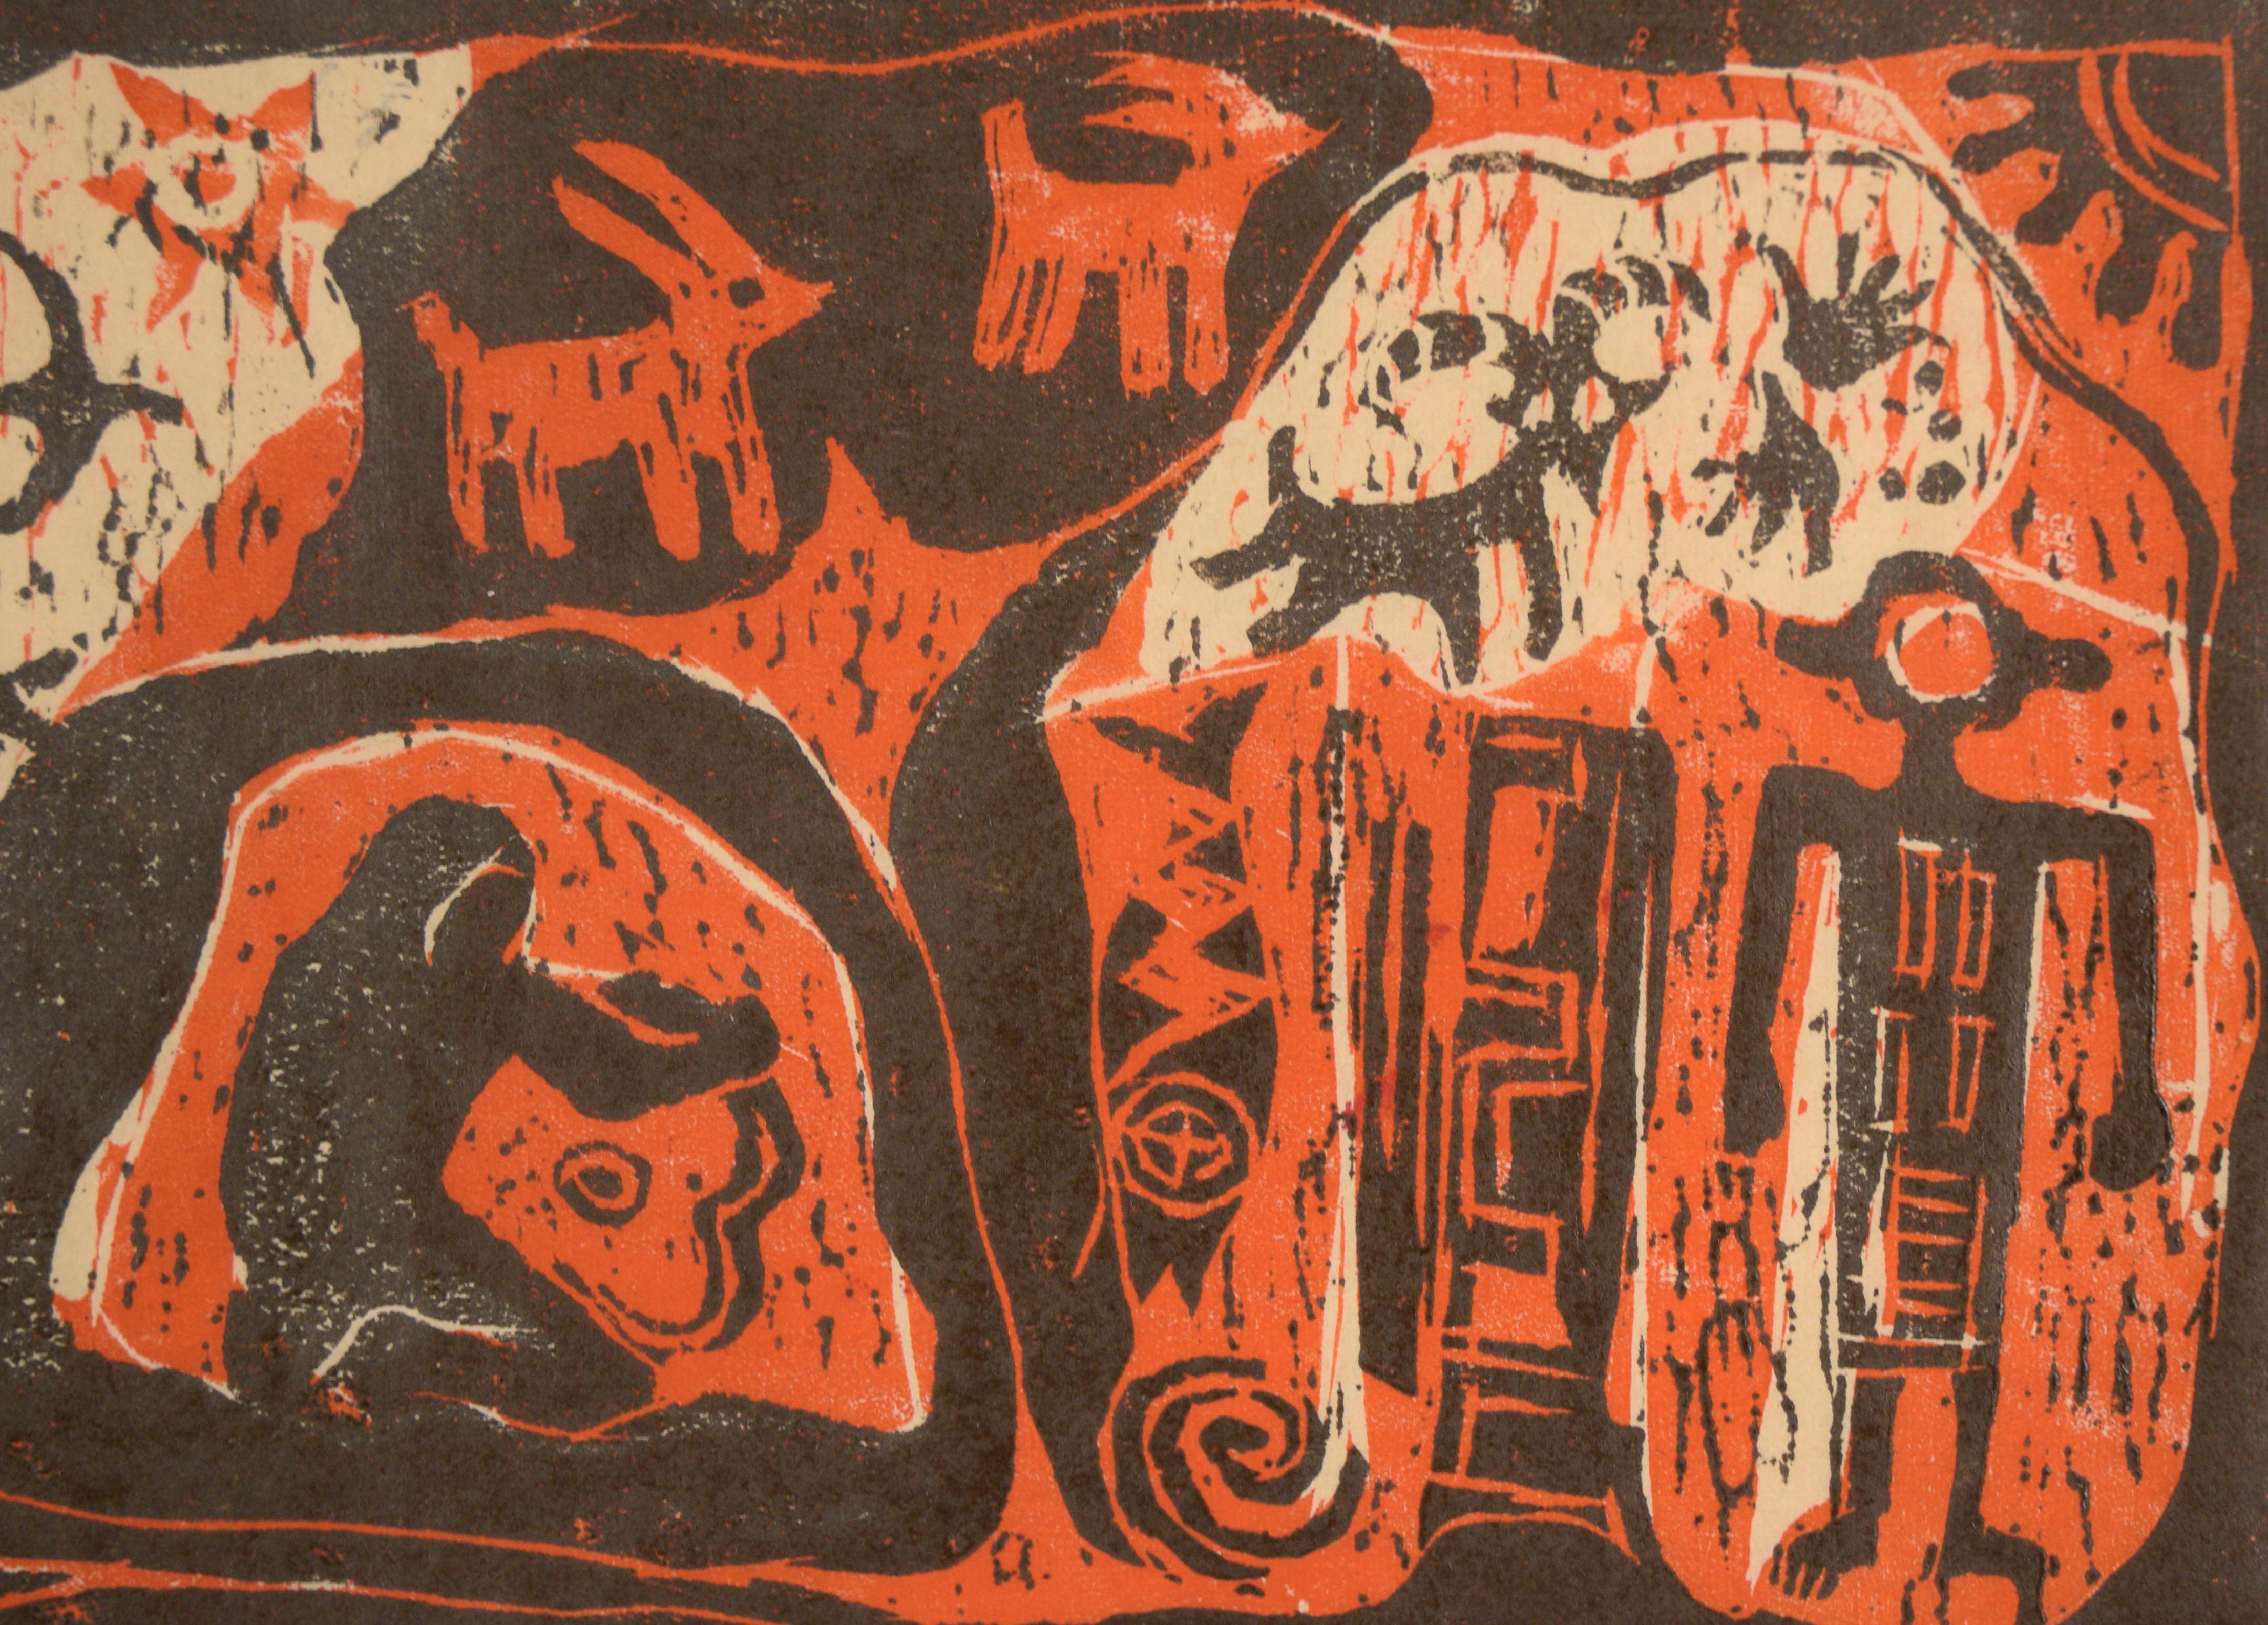 Bold woodcut print by M. Sheppard (20th Century). This piece is filled with Neolithic imagery of people and animals. There are two figures that are engaged in hunting and several prey animals. To the right, there is a figure standing tall, possibly